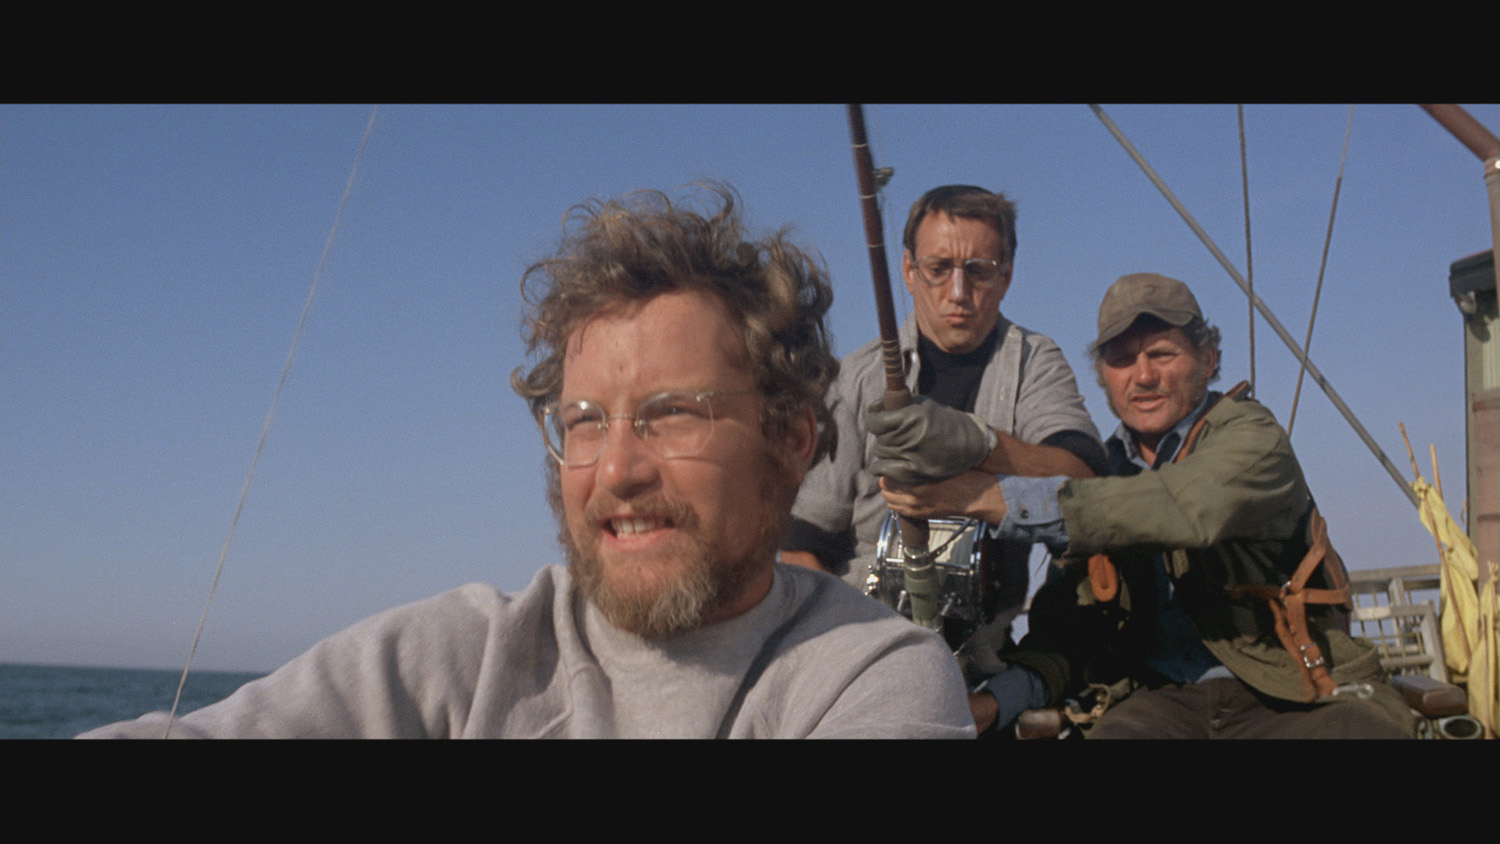 The three men stare at the shark in the distance, two of them holding a fishing line.